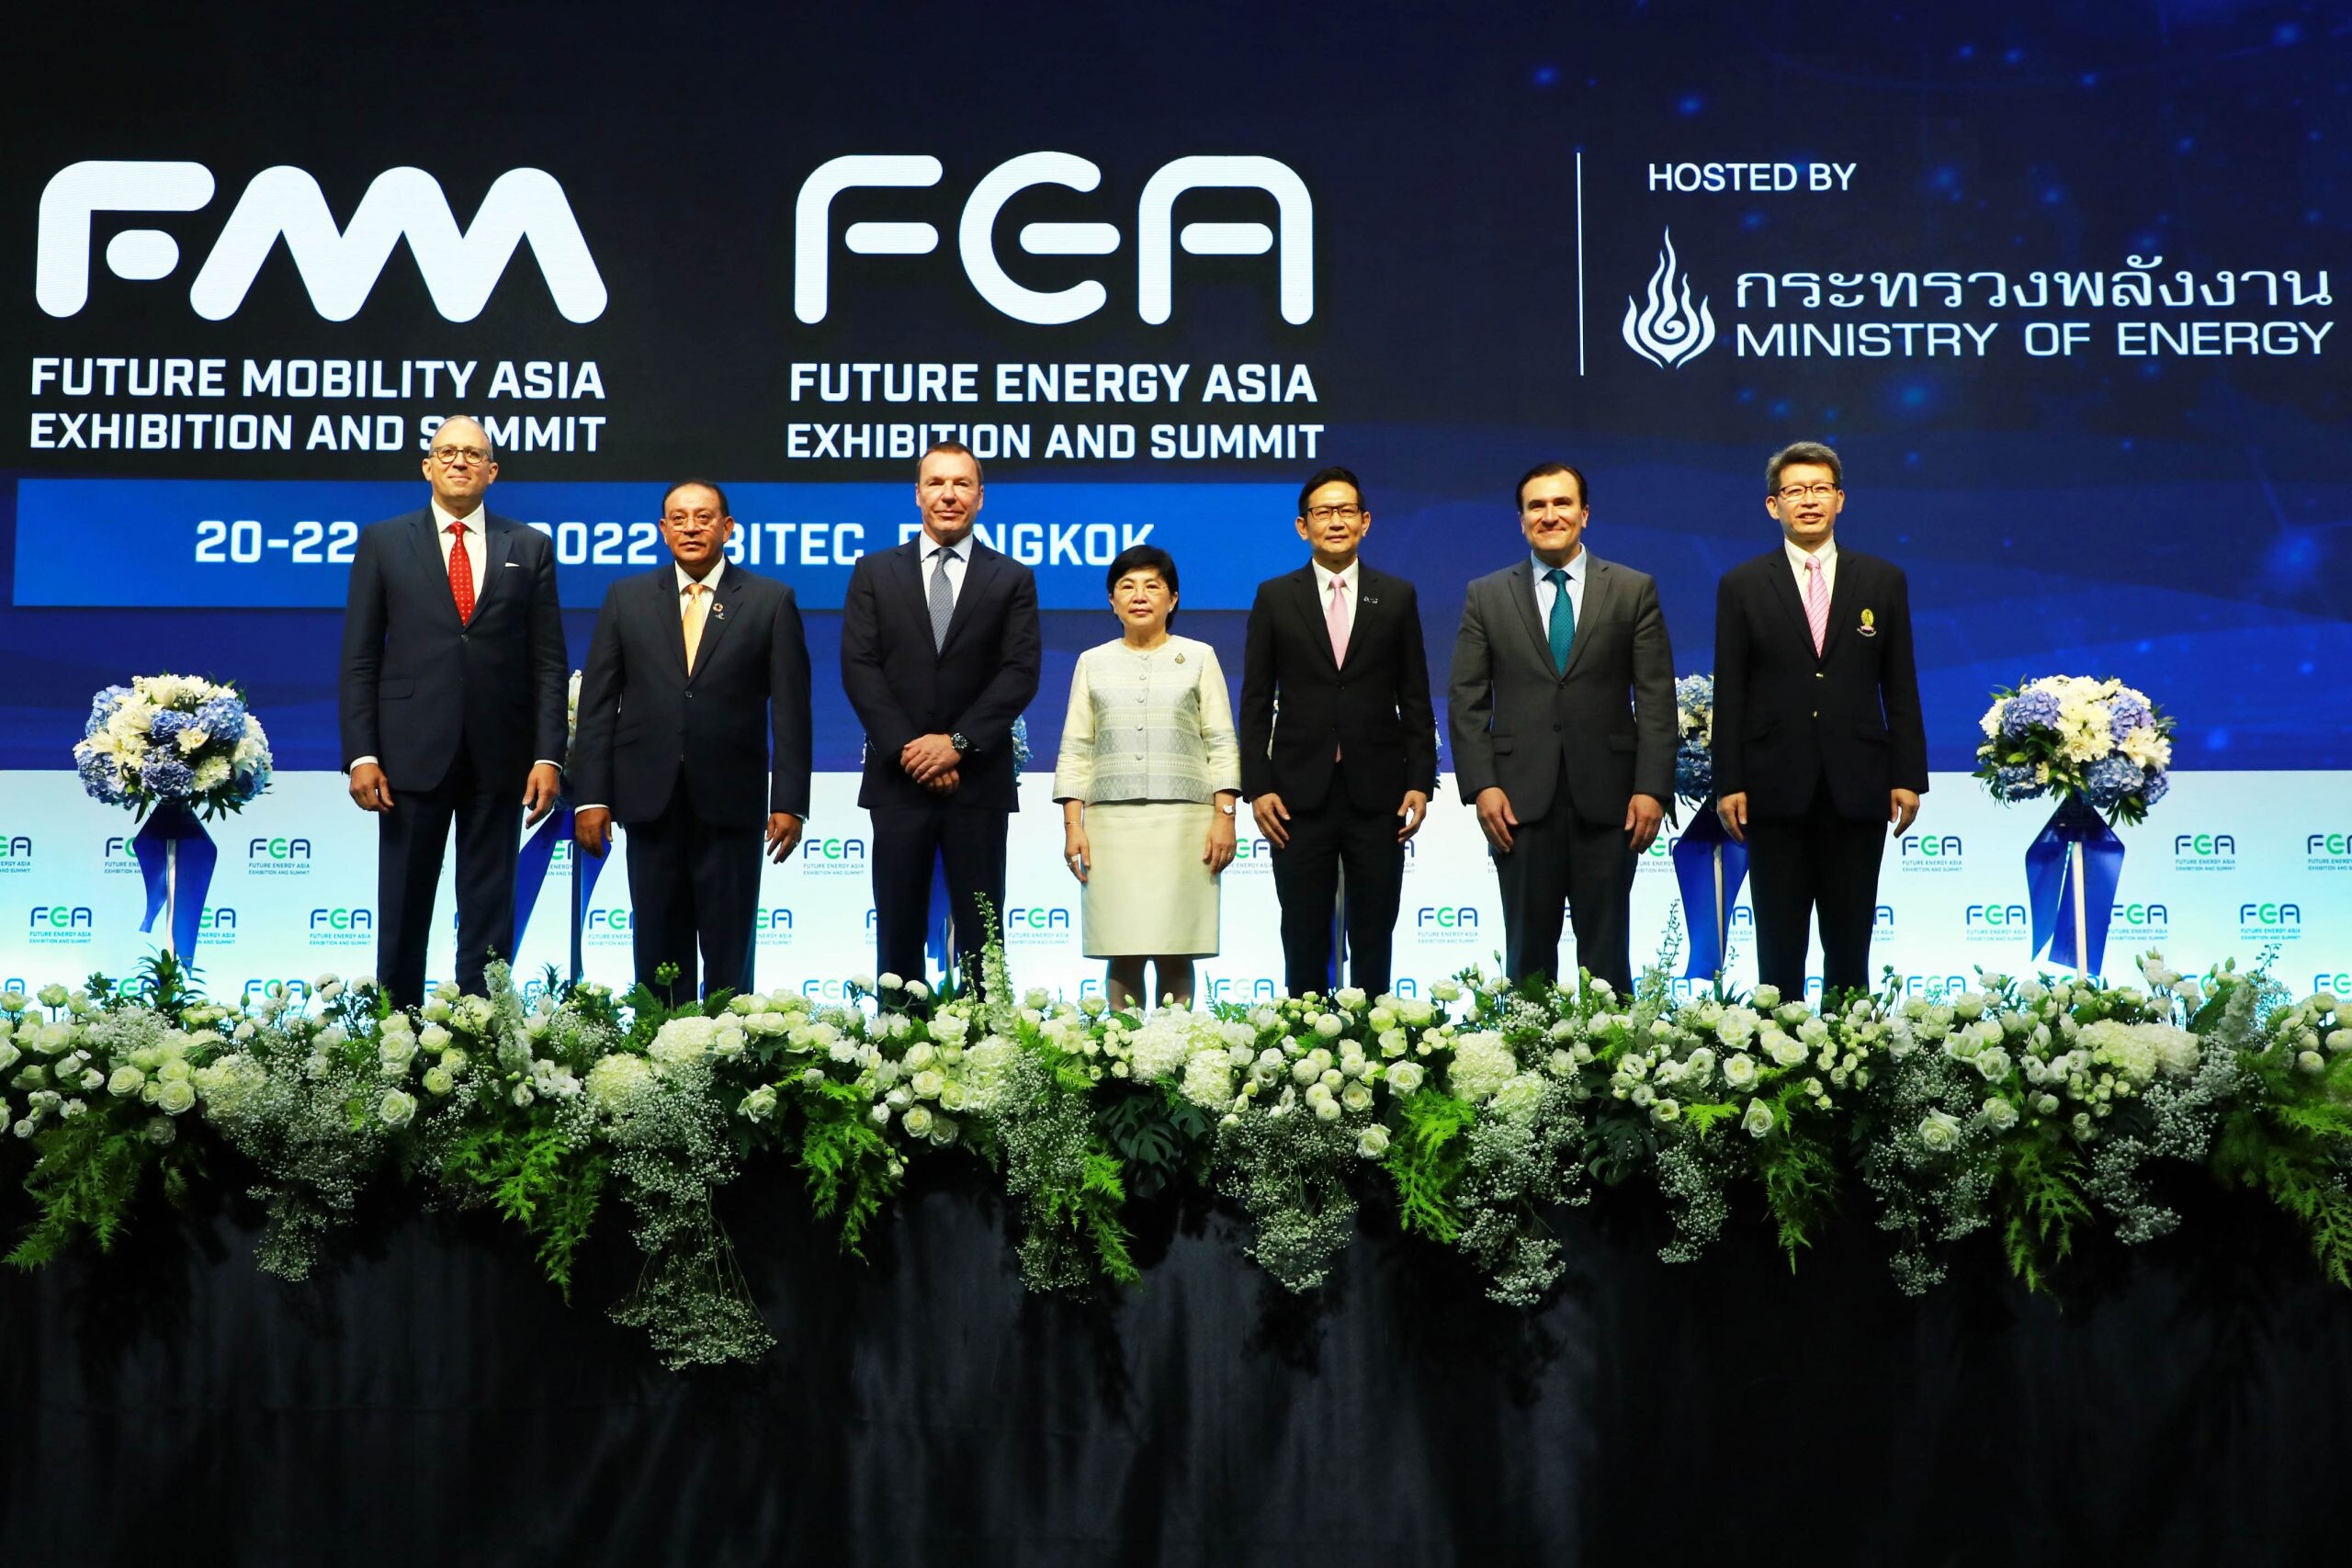 Ministry of Energy Thailand join forces with PTT, PTTEP and dmg events to host the regional summits "Future Energy Asia" and "Future Mobility Asia"